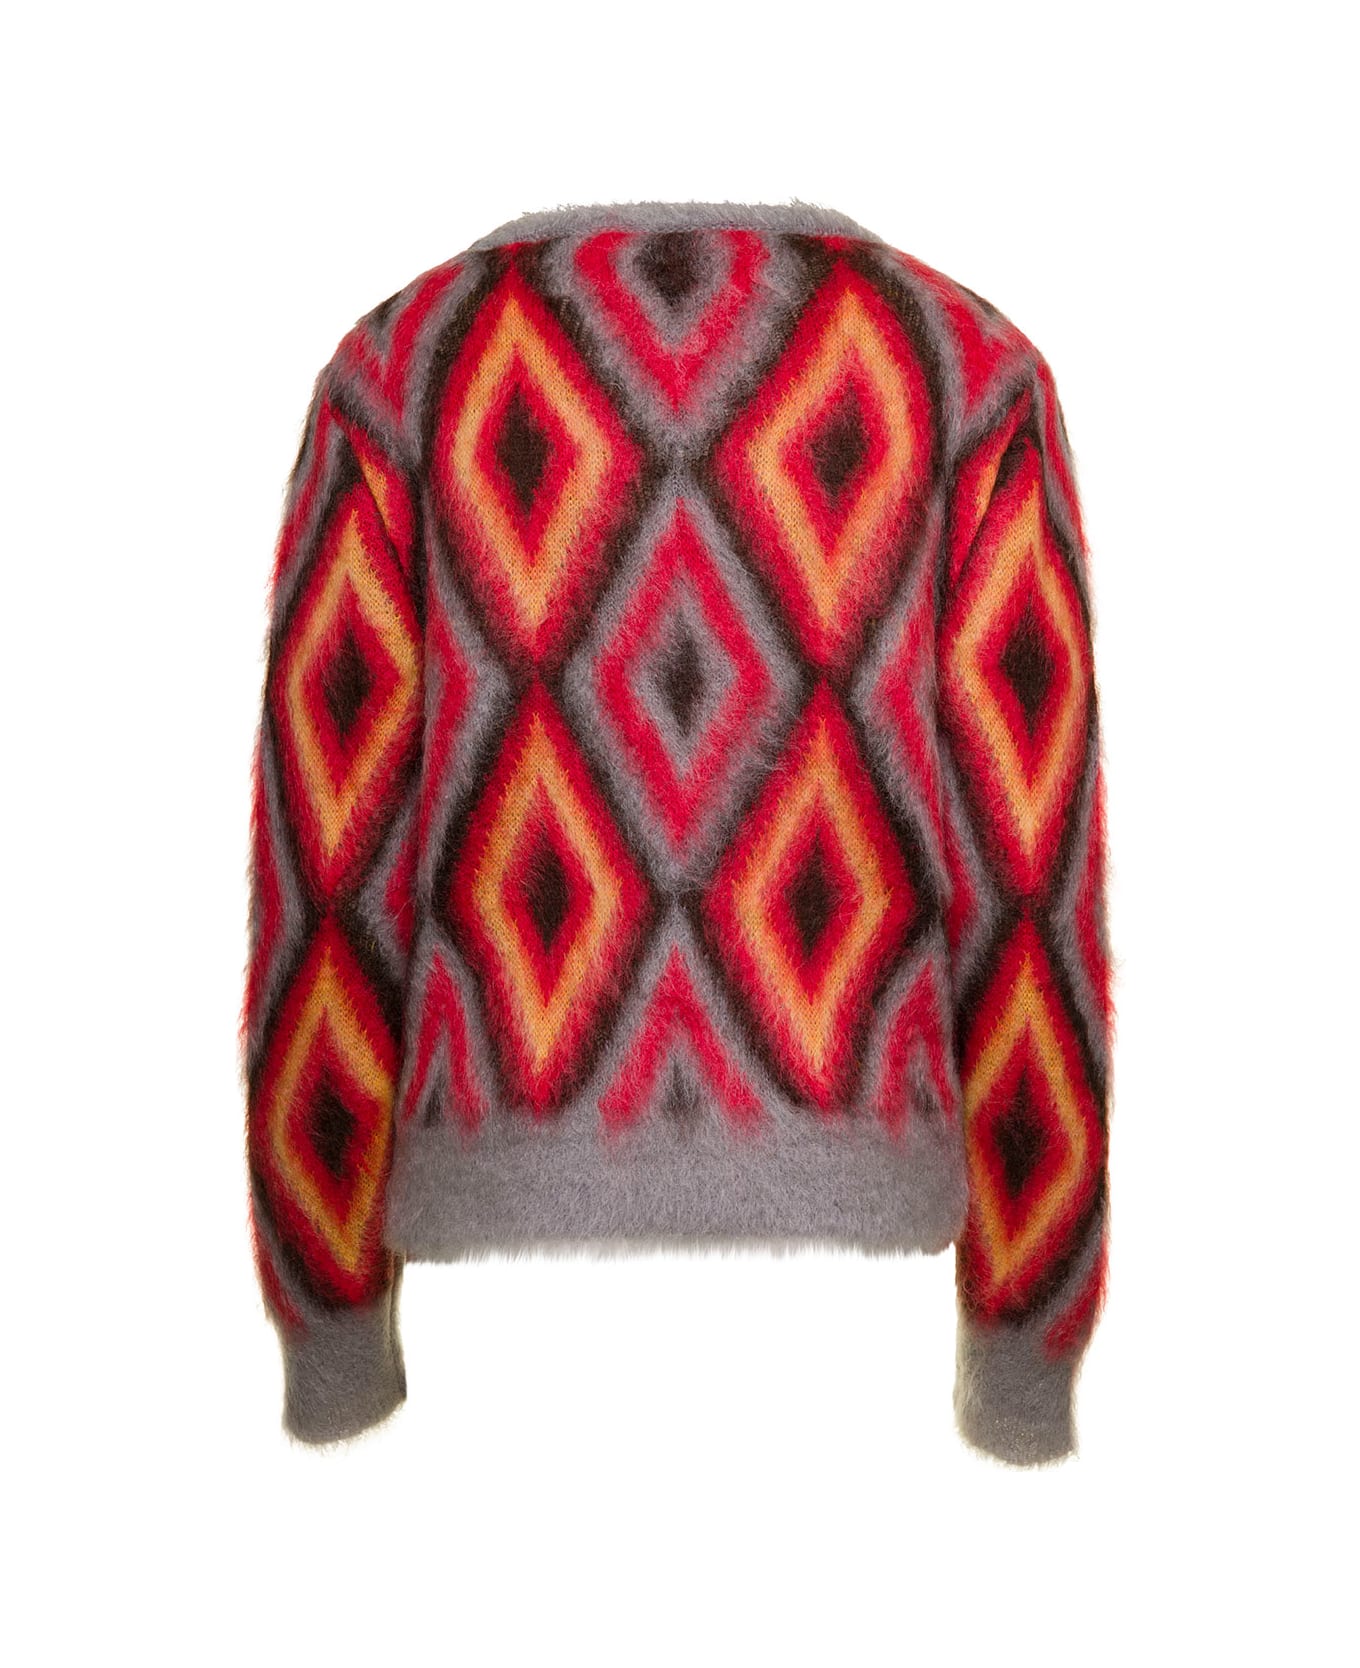 Etro Red Sweater With Intarsia-knit Geometric Pattern In Brushed Wool Blend Woman Etro - MULTICOLOR